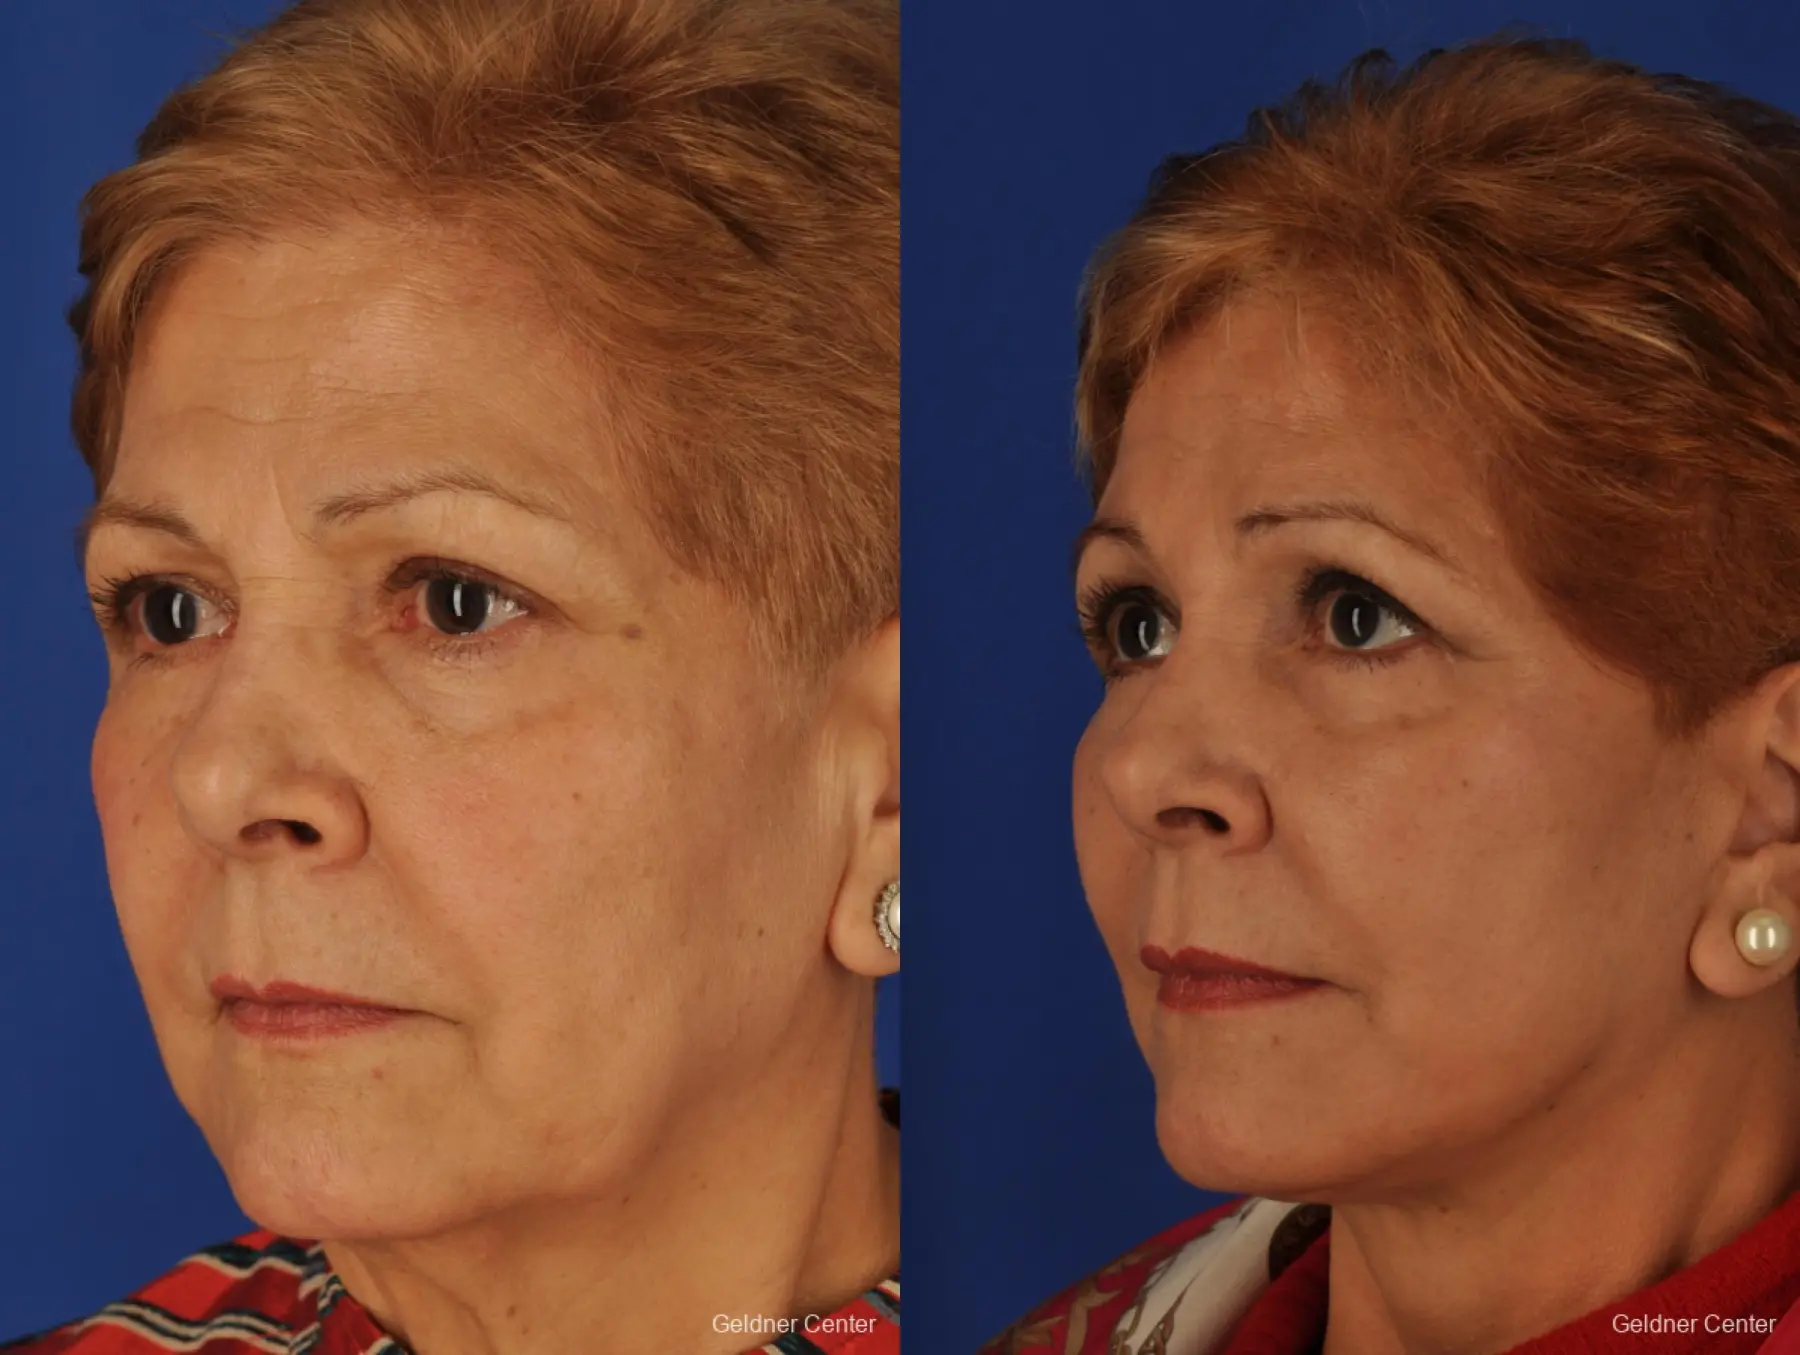 Neck Lift: Patient 1 - Before and After 4